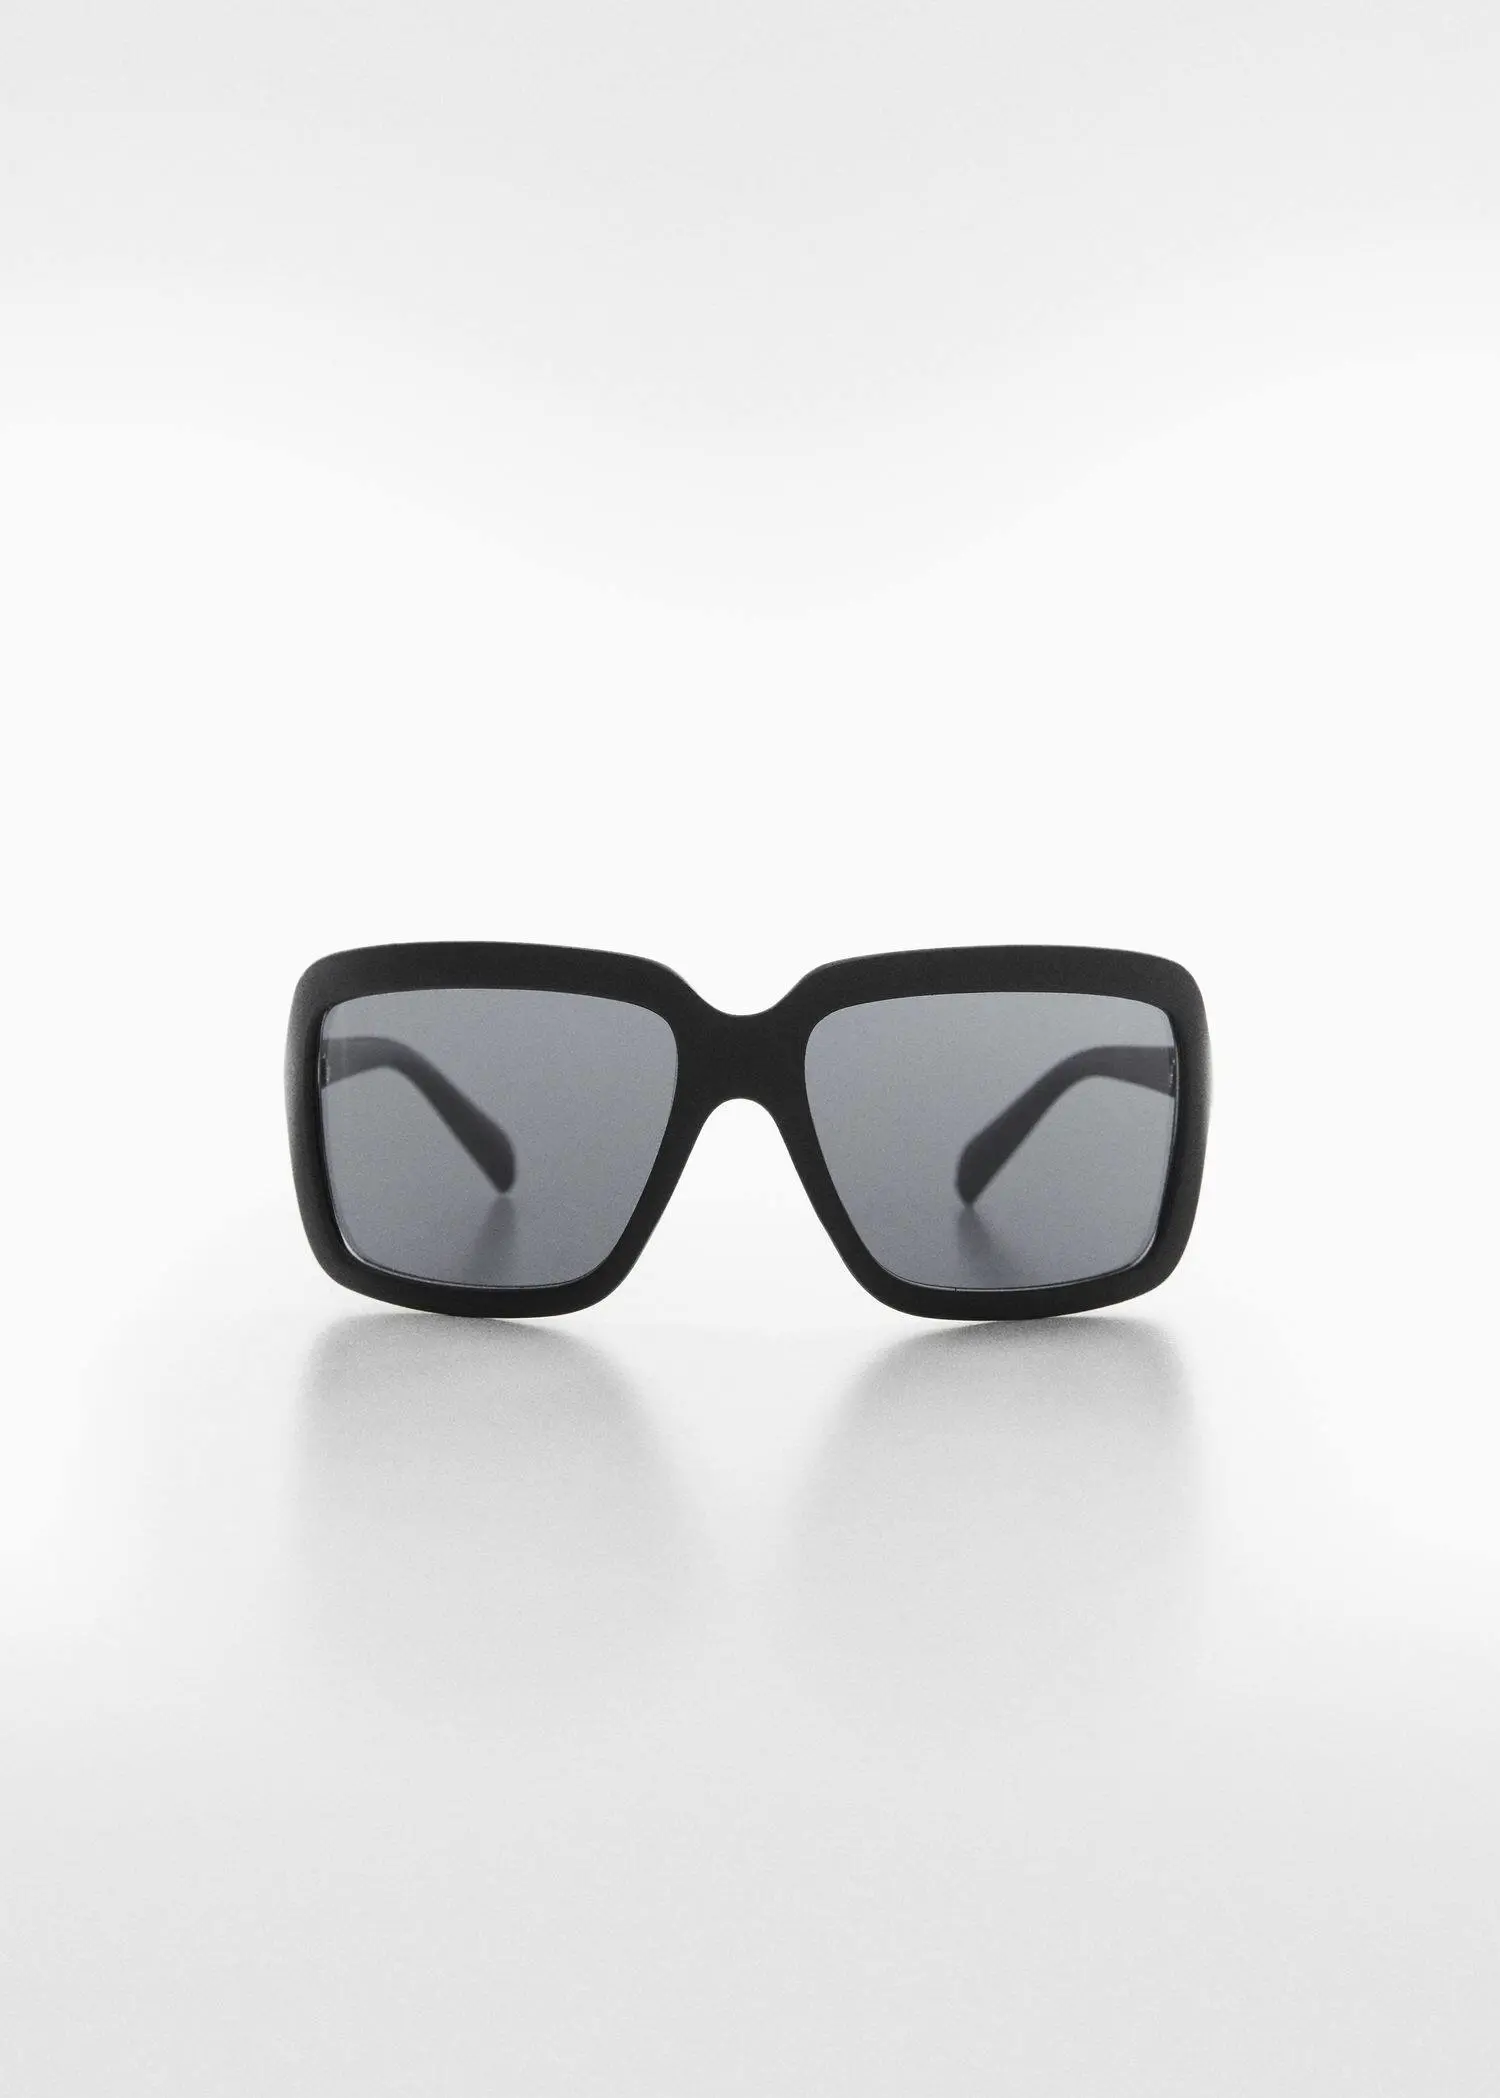 Mango Squared frame sunglasses. a pair of sunglasses on a white surface. 